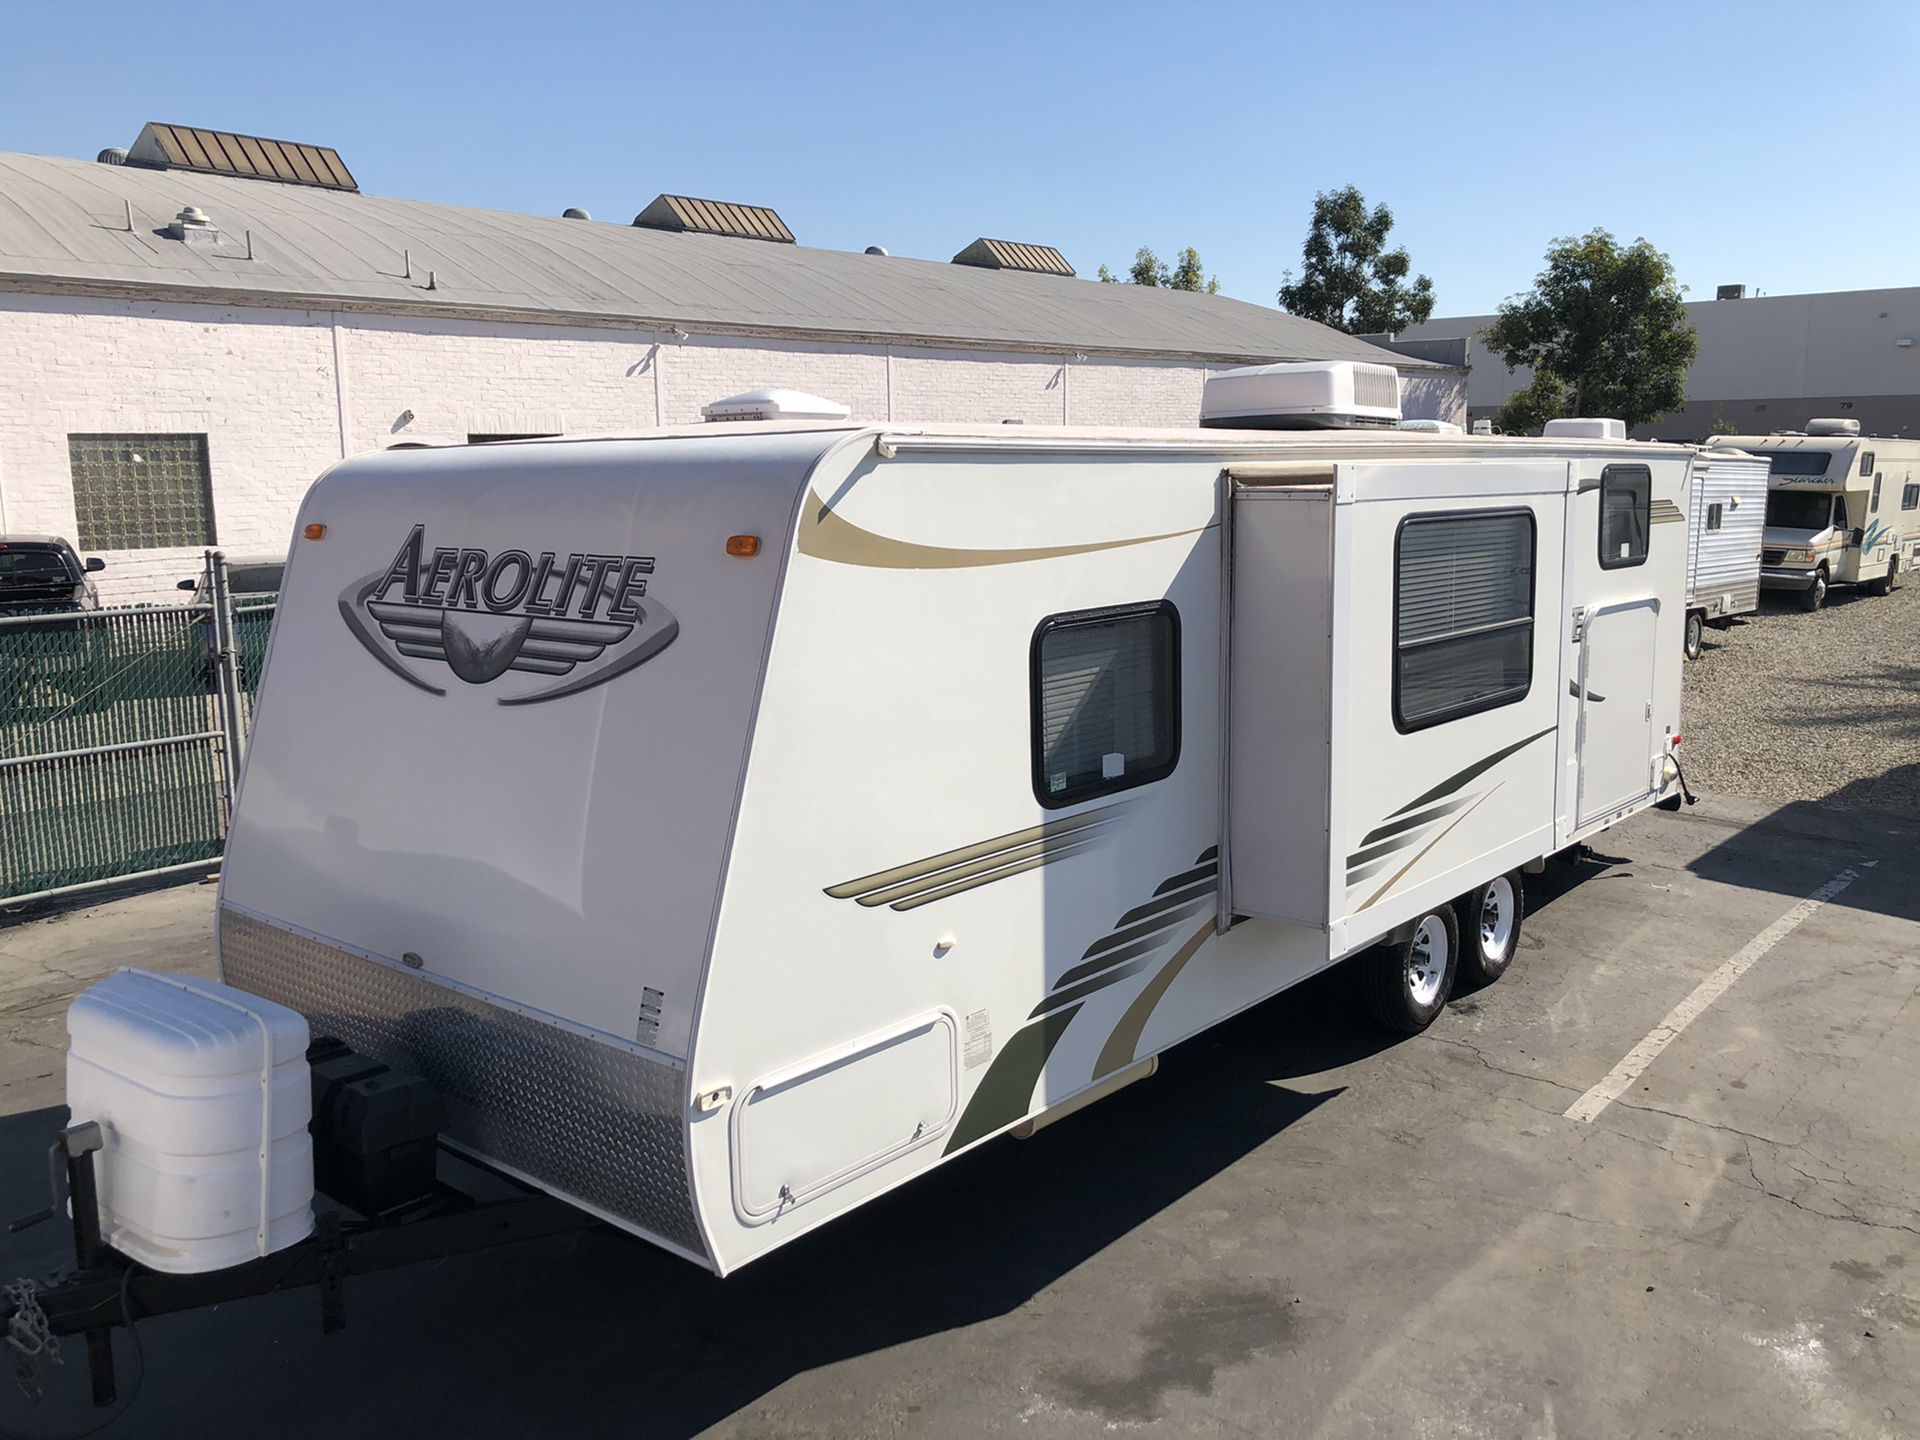 2010 Aerolite 25FT Travel Trailer With Slide Out, Bunkhouse & Solar Only 4200LBS Brand New Ready To Go Must See